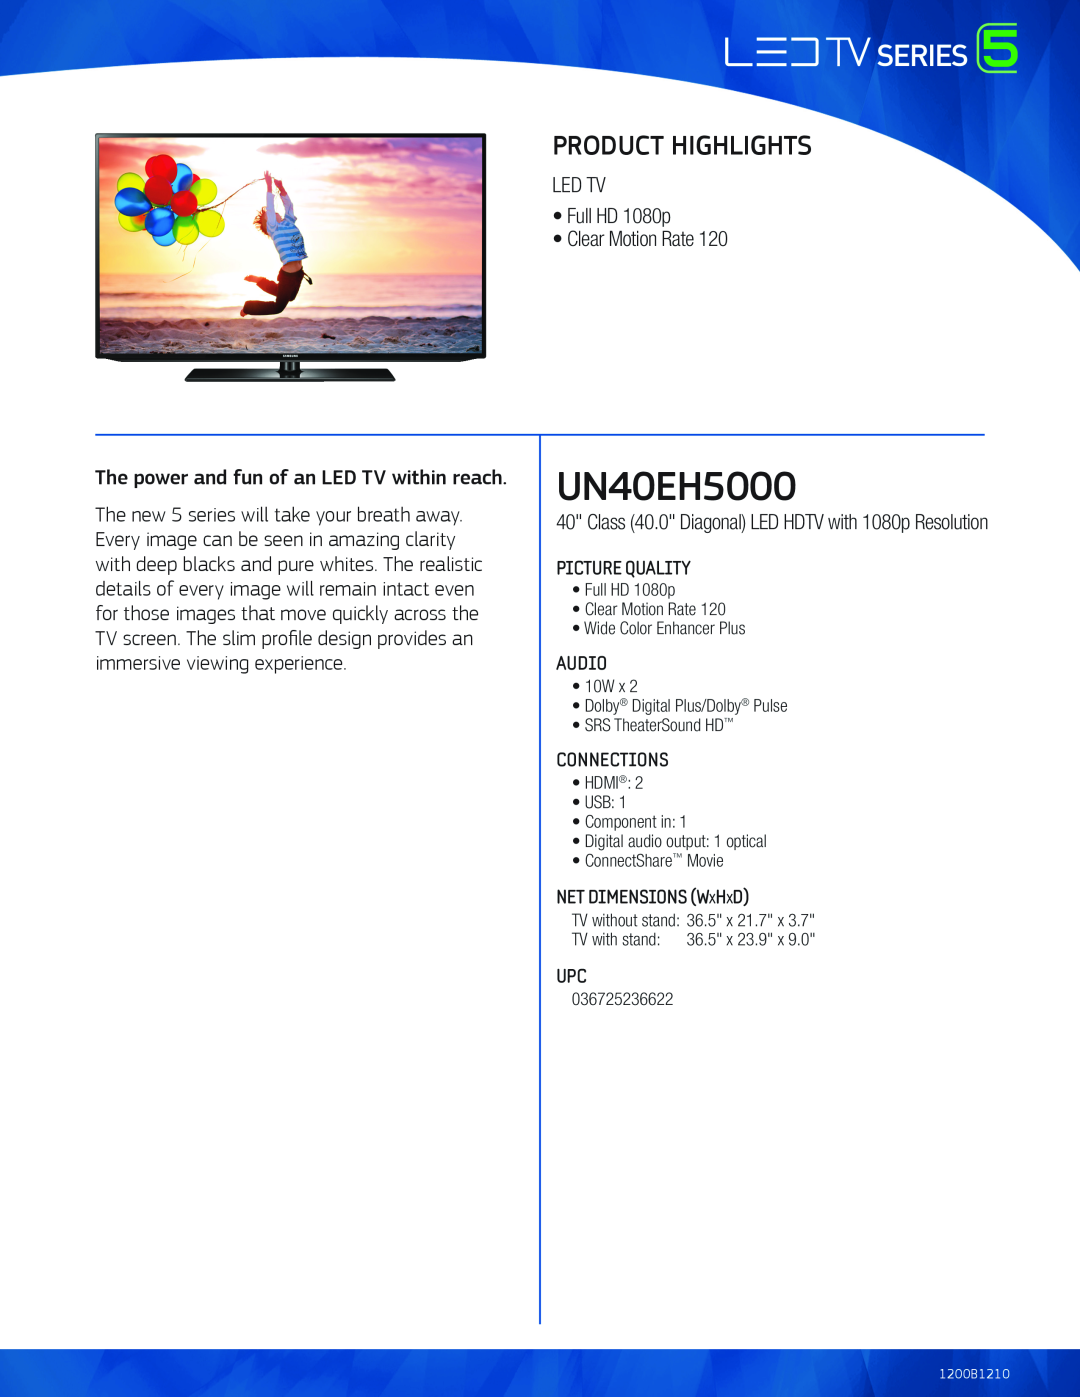 Samsung UN40EH5000 dimensions Product Highlights 